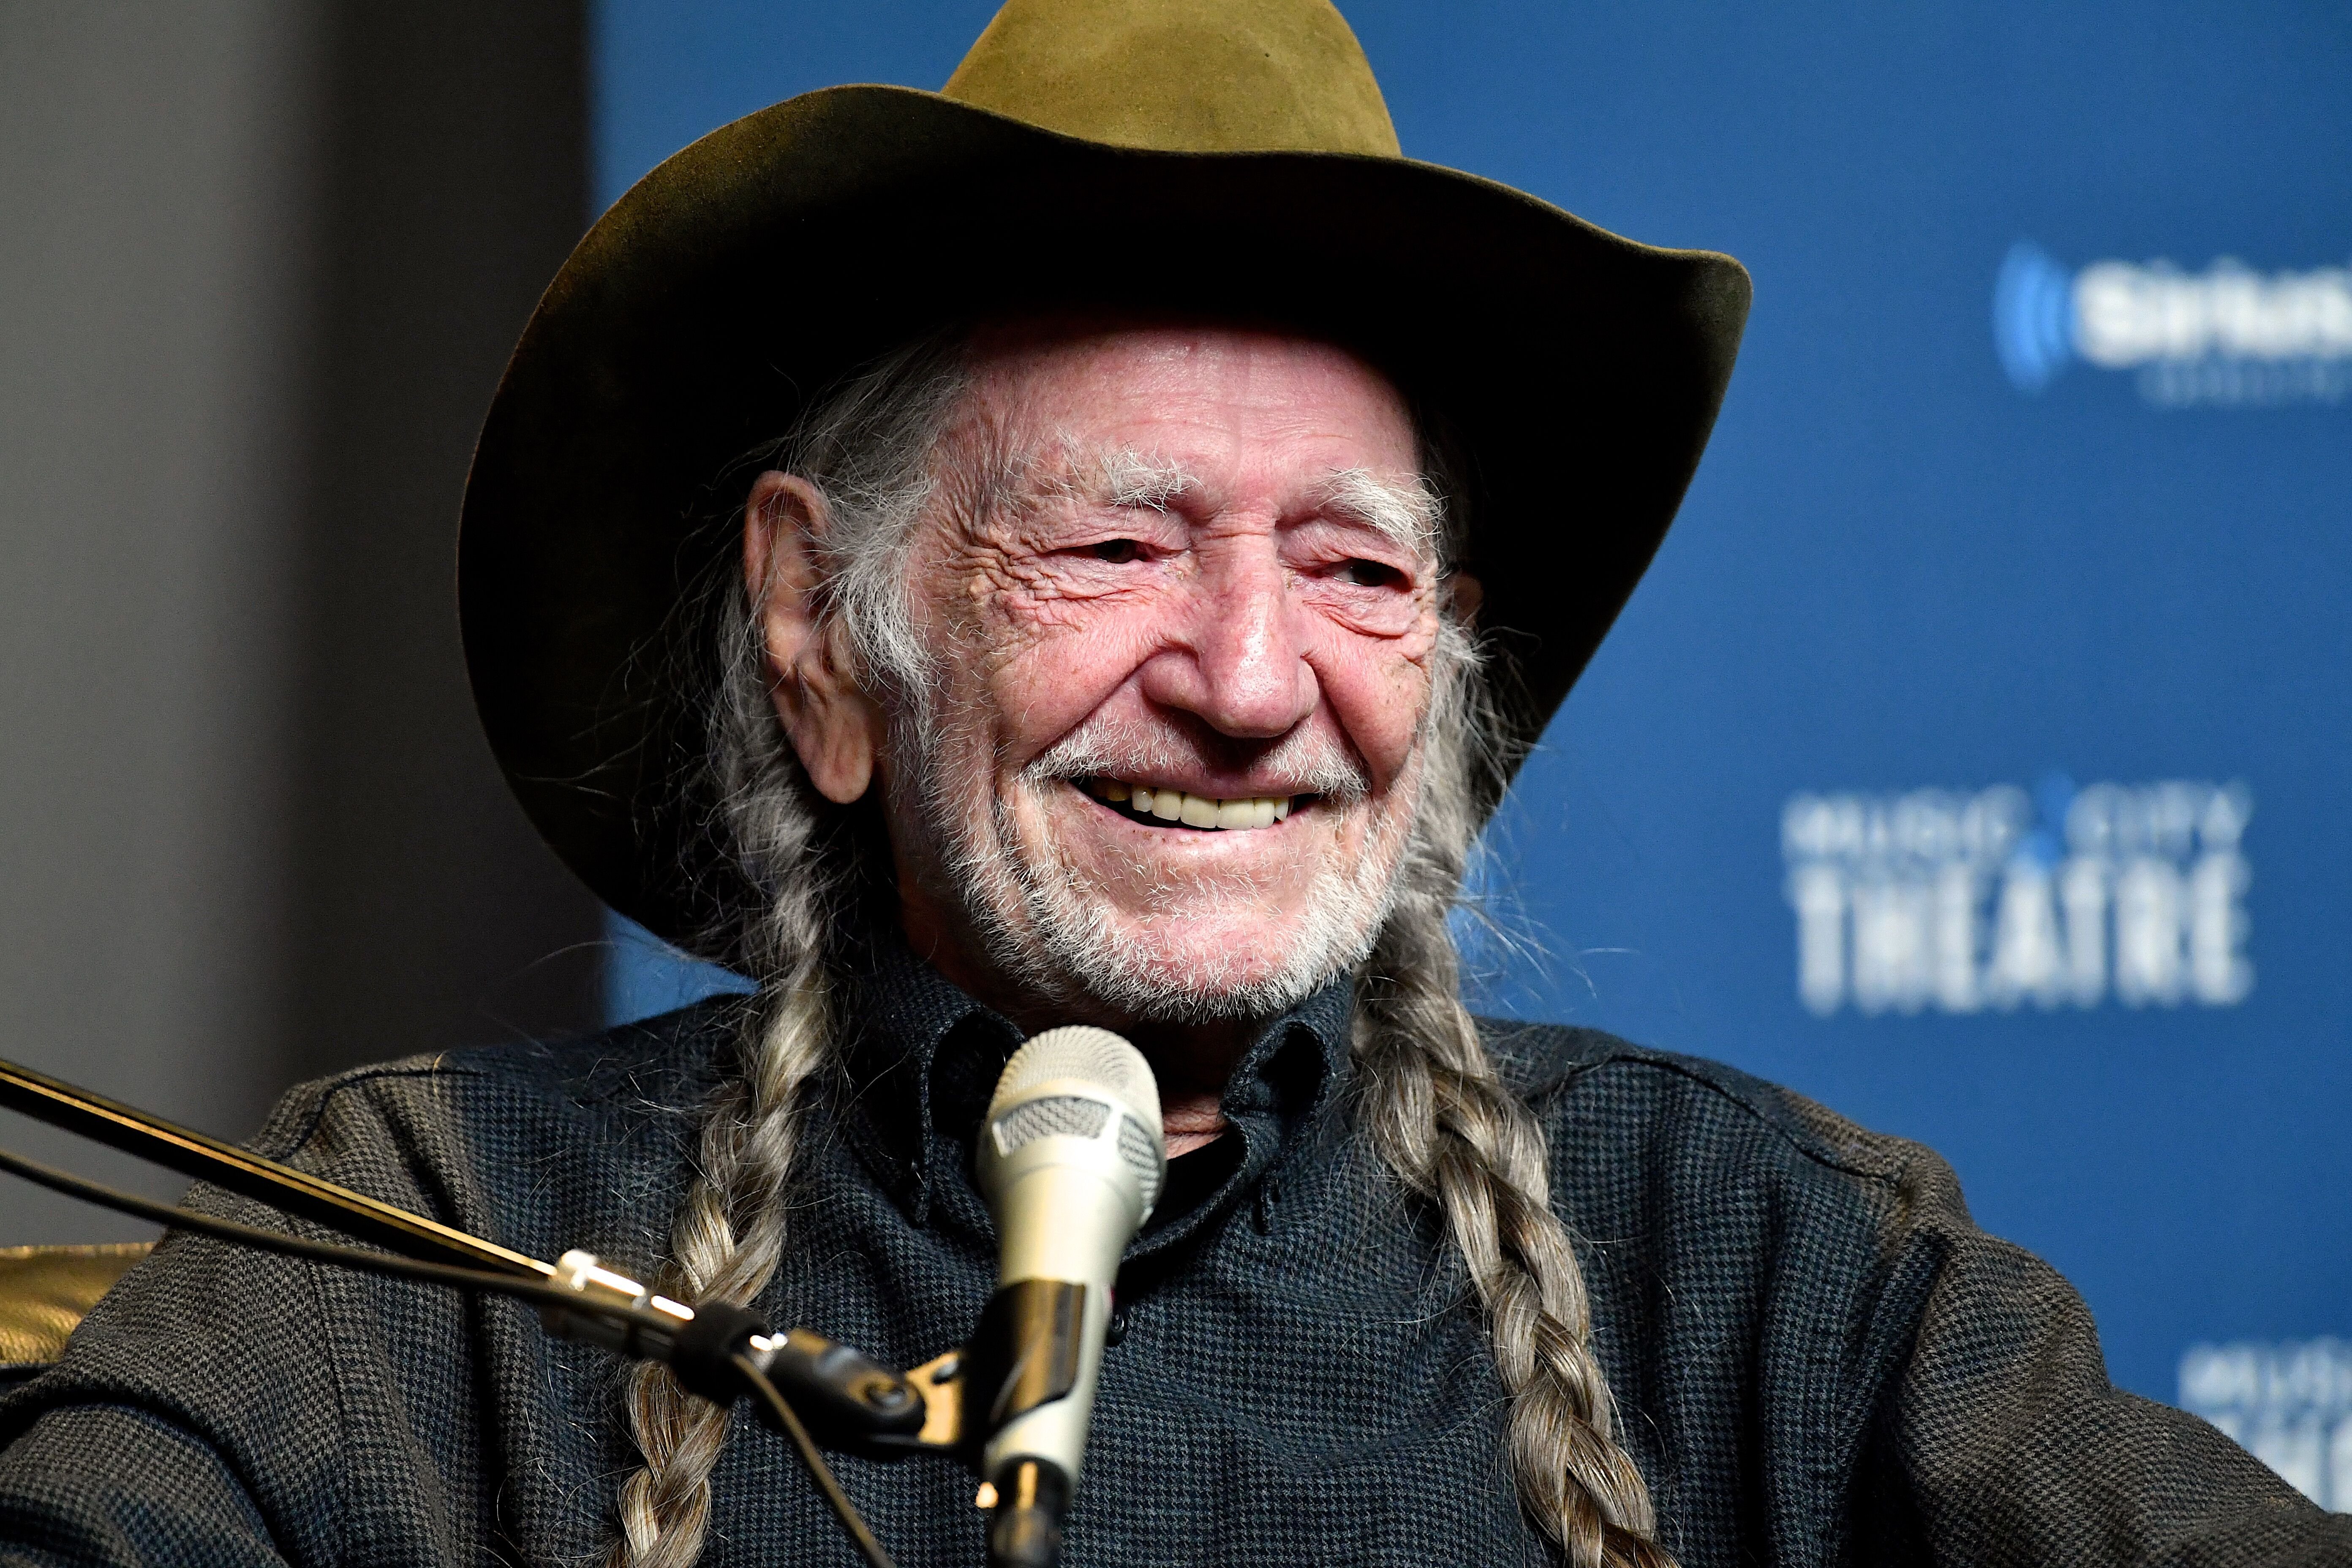 Willie Nelson speaks onstage at his album premiere. | Source: Getty Images